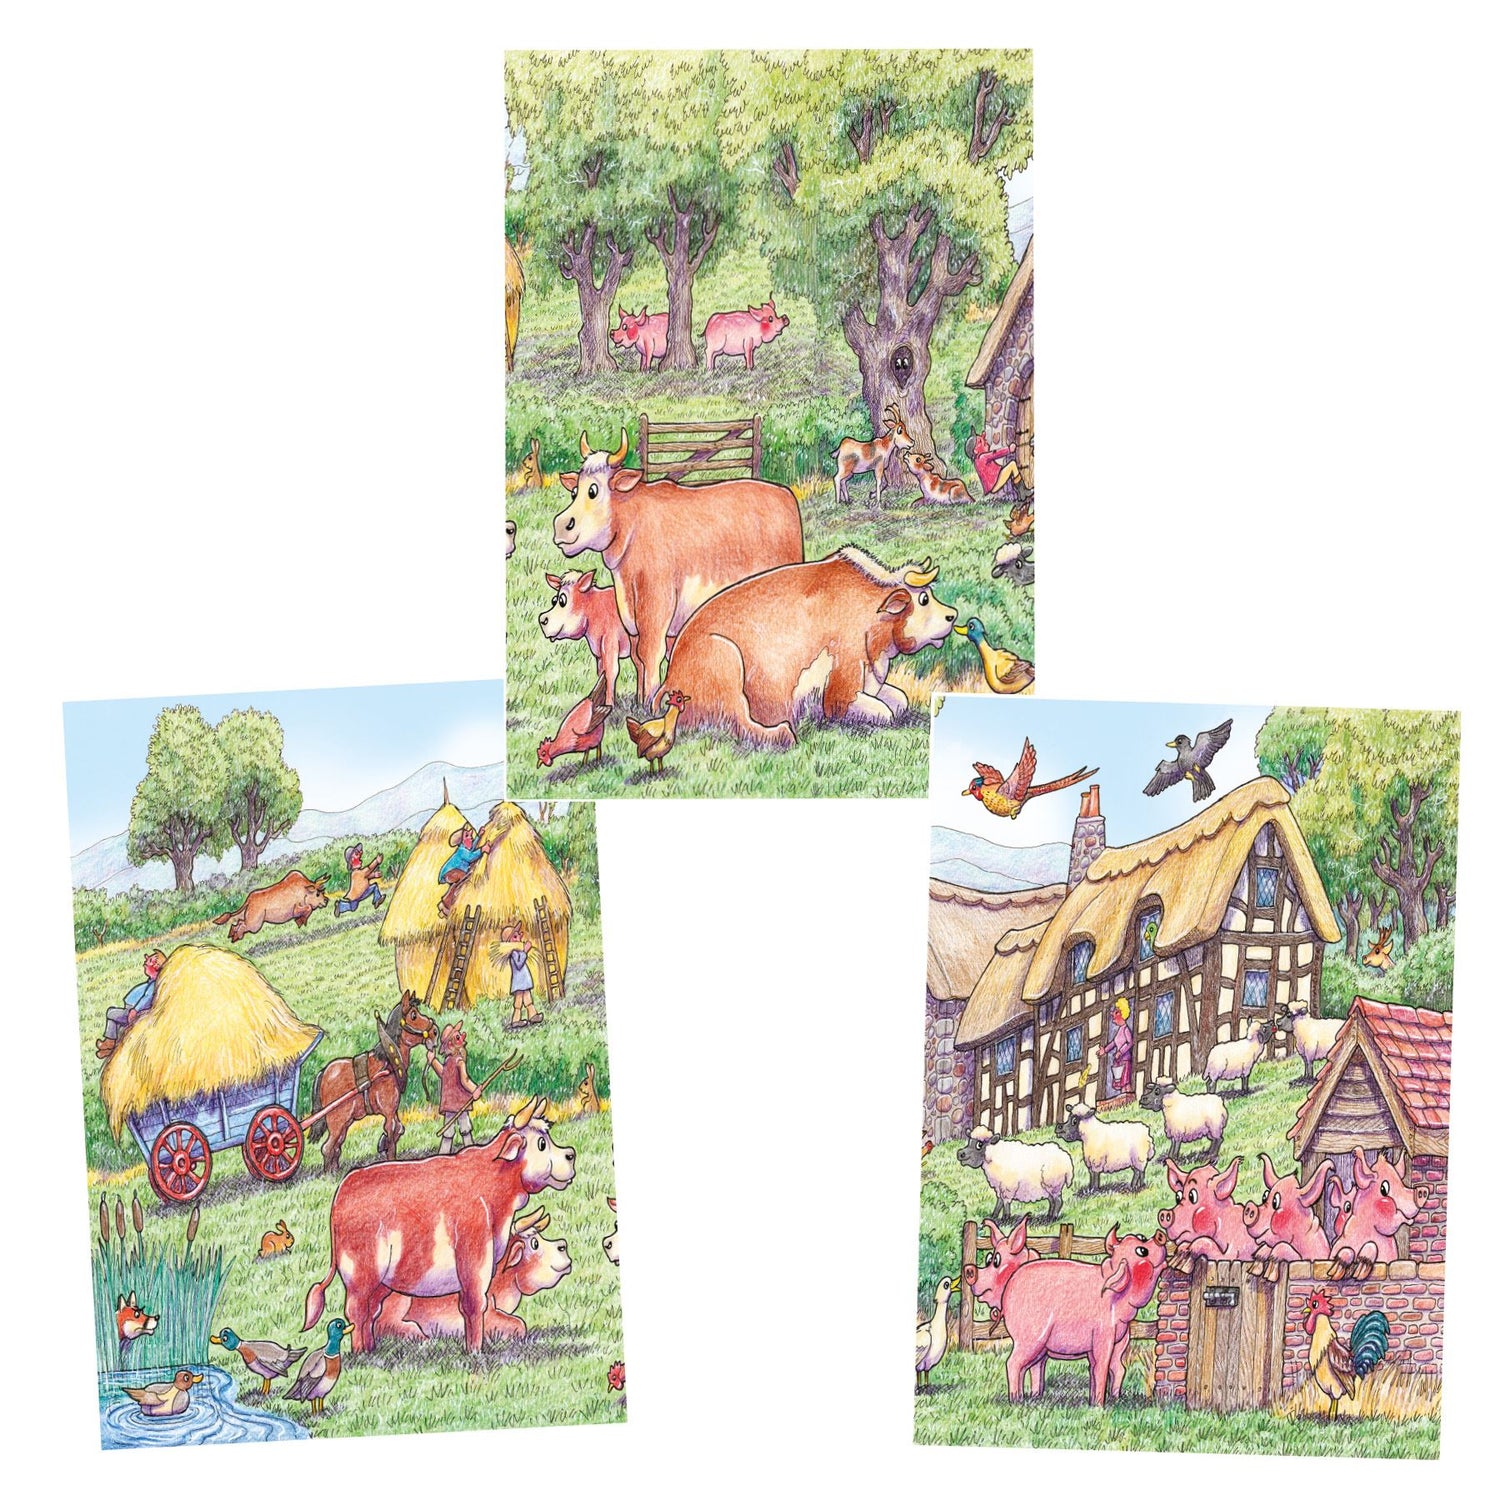 Just Jigsaw Puzzles - The entire jigsaw puzzle range